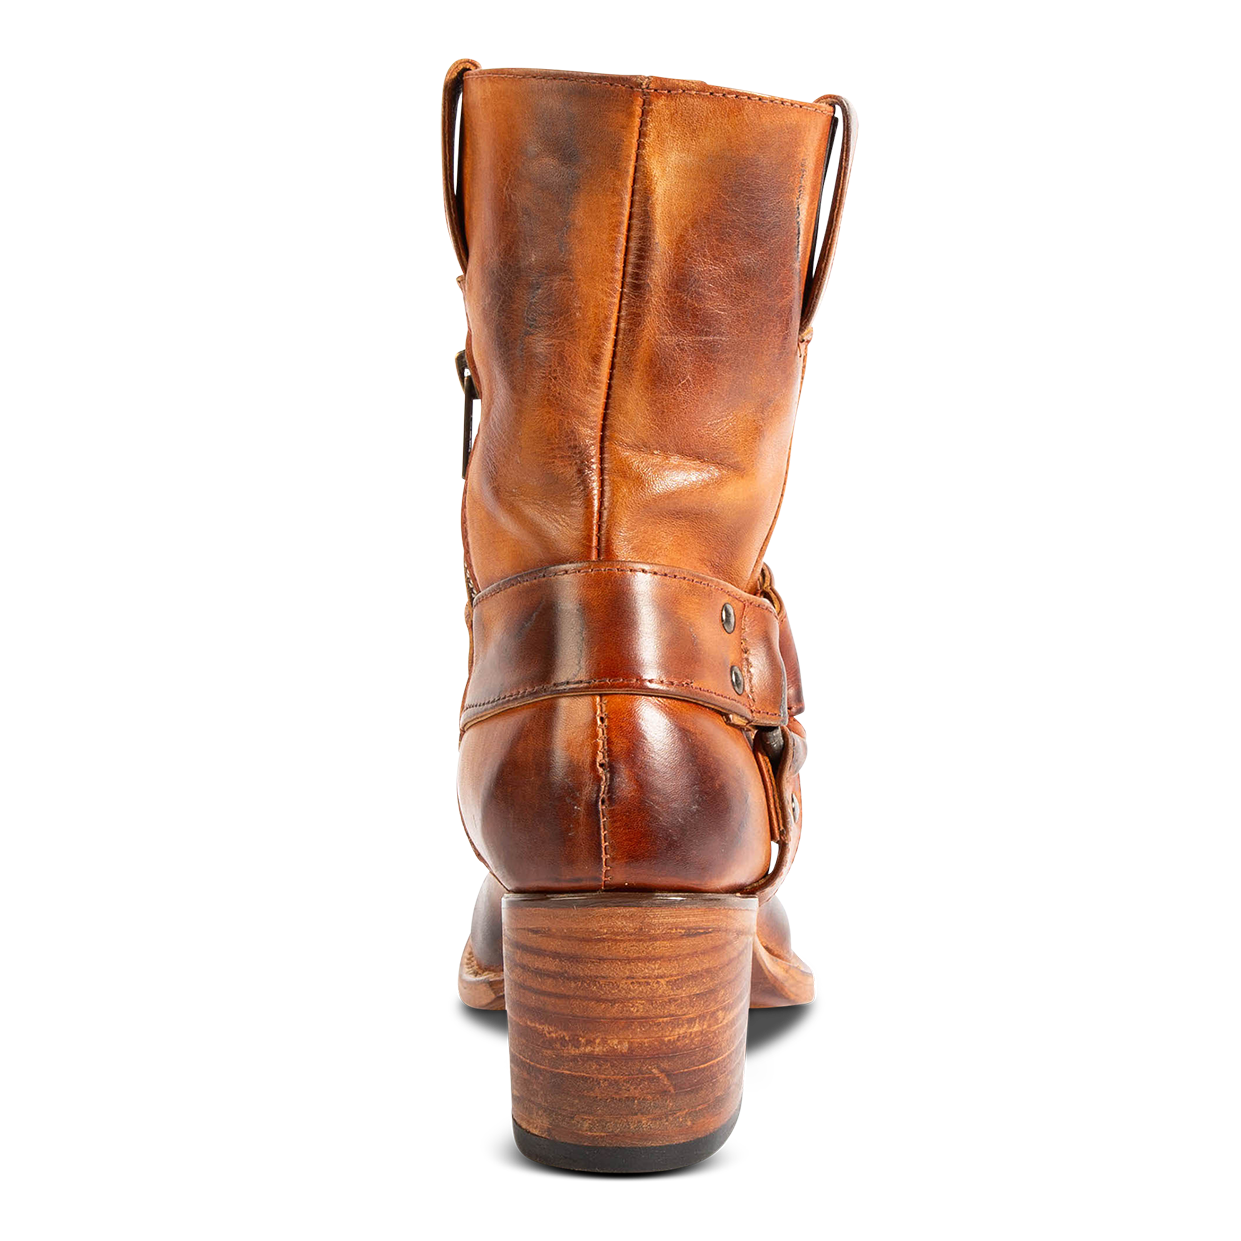 Back view showing FREEBIRD women's Darcy whiskey boot with leather pull straps, inside zip closure, and square toe